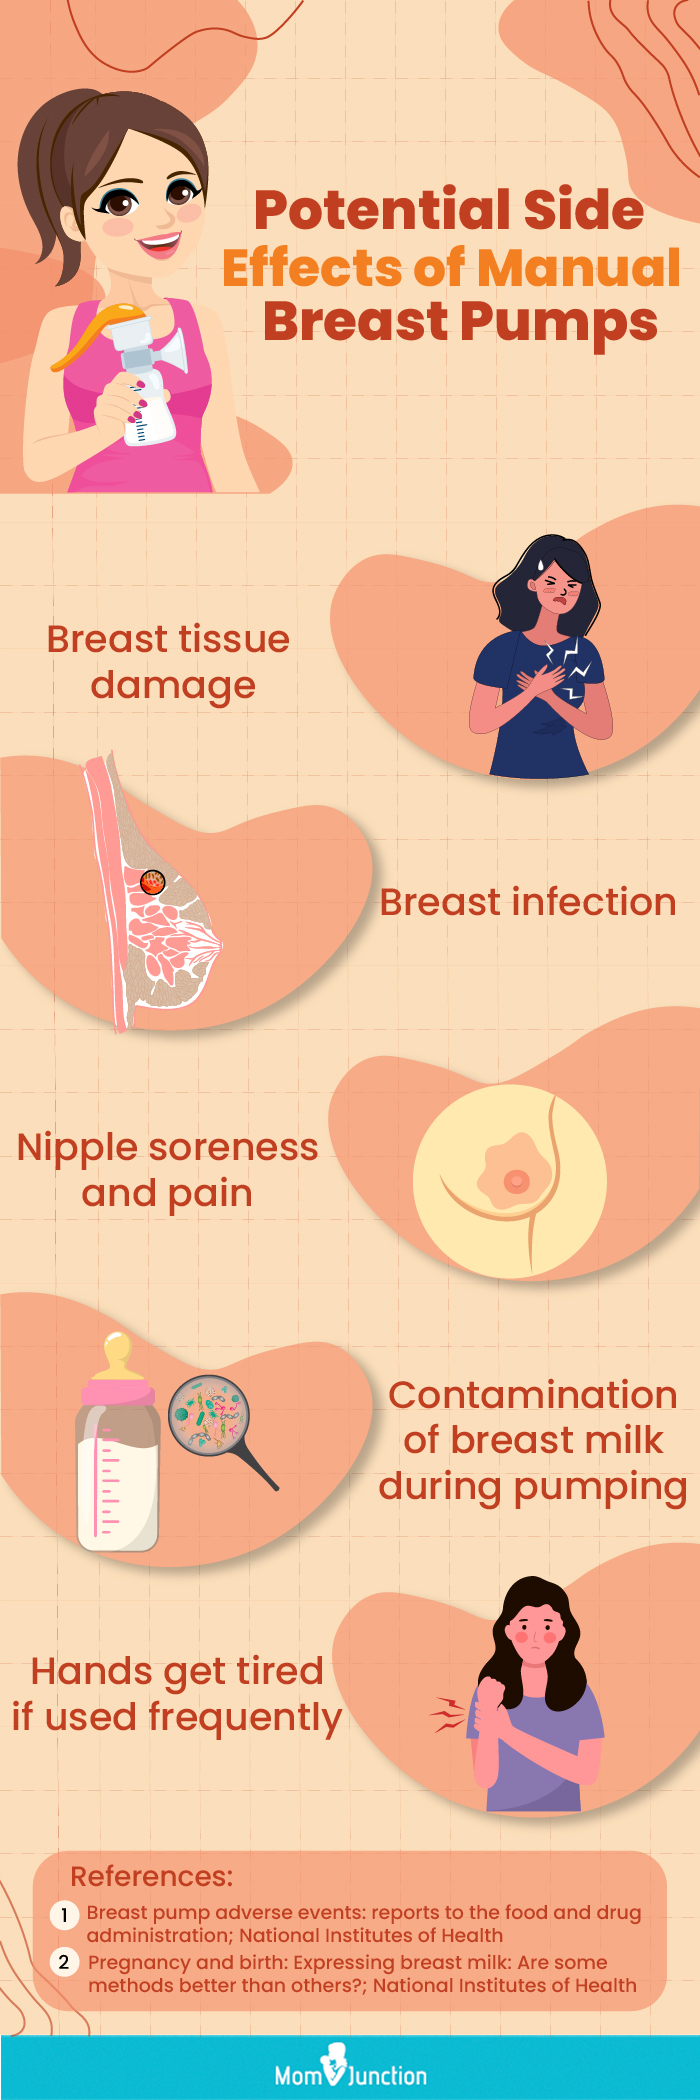 potential side effects of manual breast pumps (infographic)